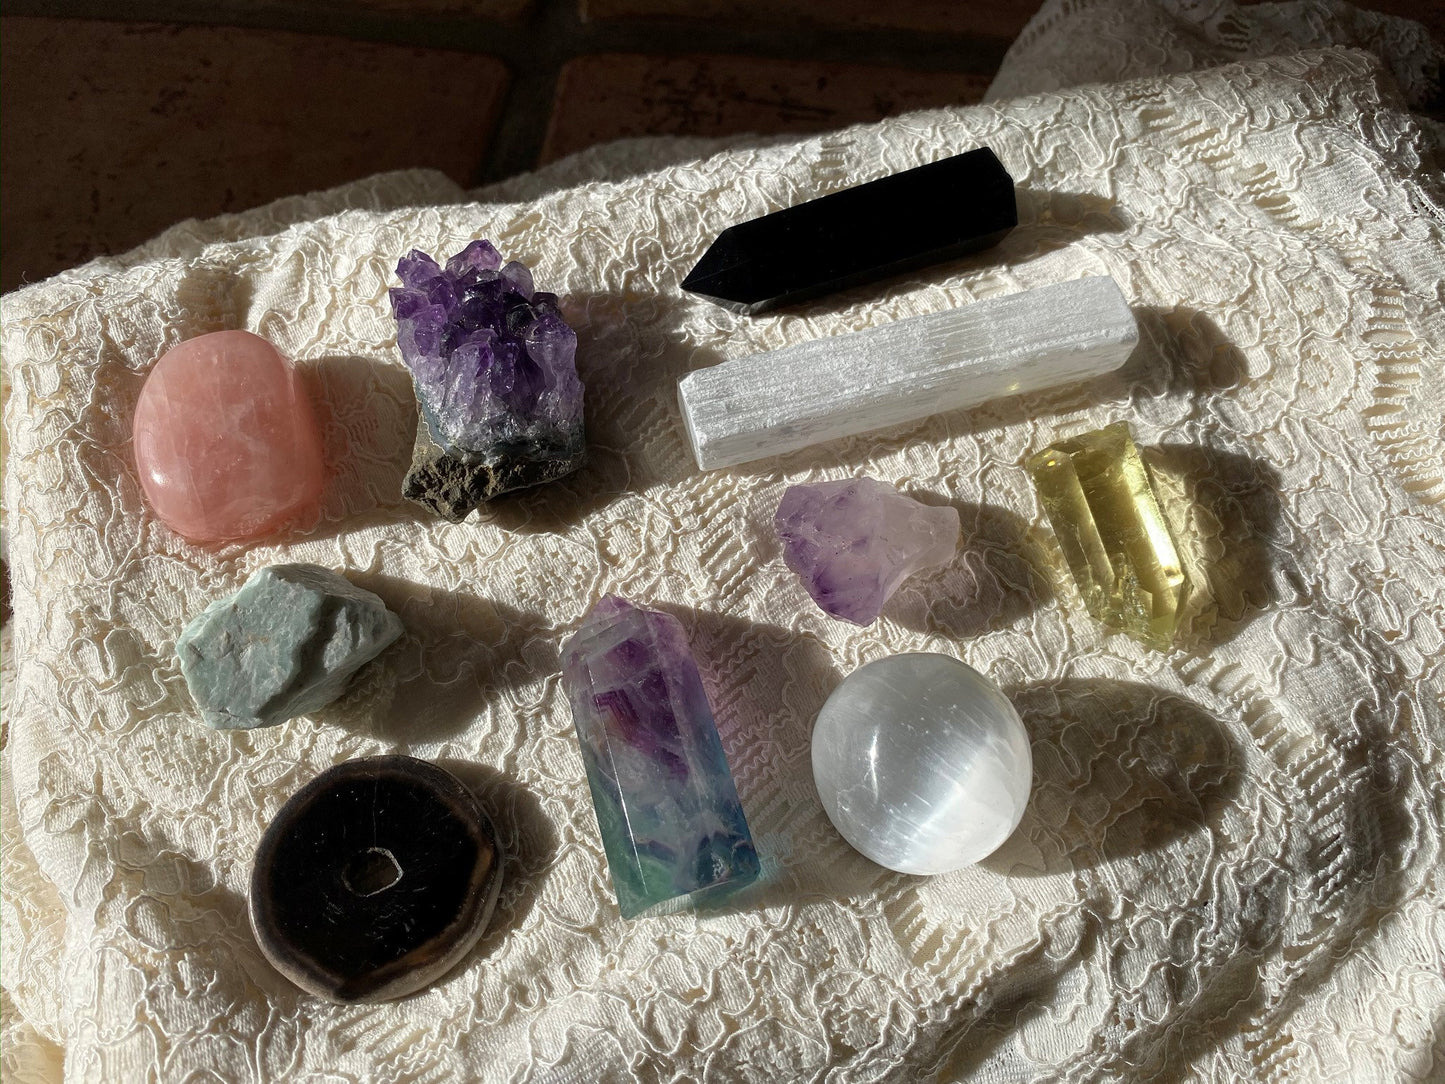 Crystal Witchcraft Kit ~ Natural Crystal Collection ~ Rough Crystal Healing Crystals and Stones Geode Amethyst selenite fluorite obsidian